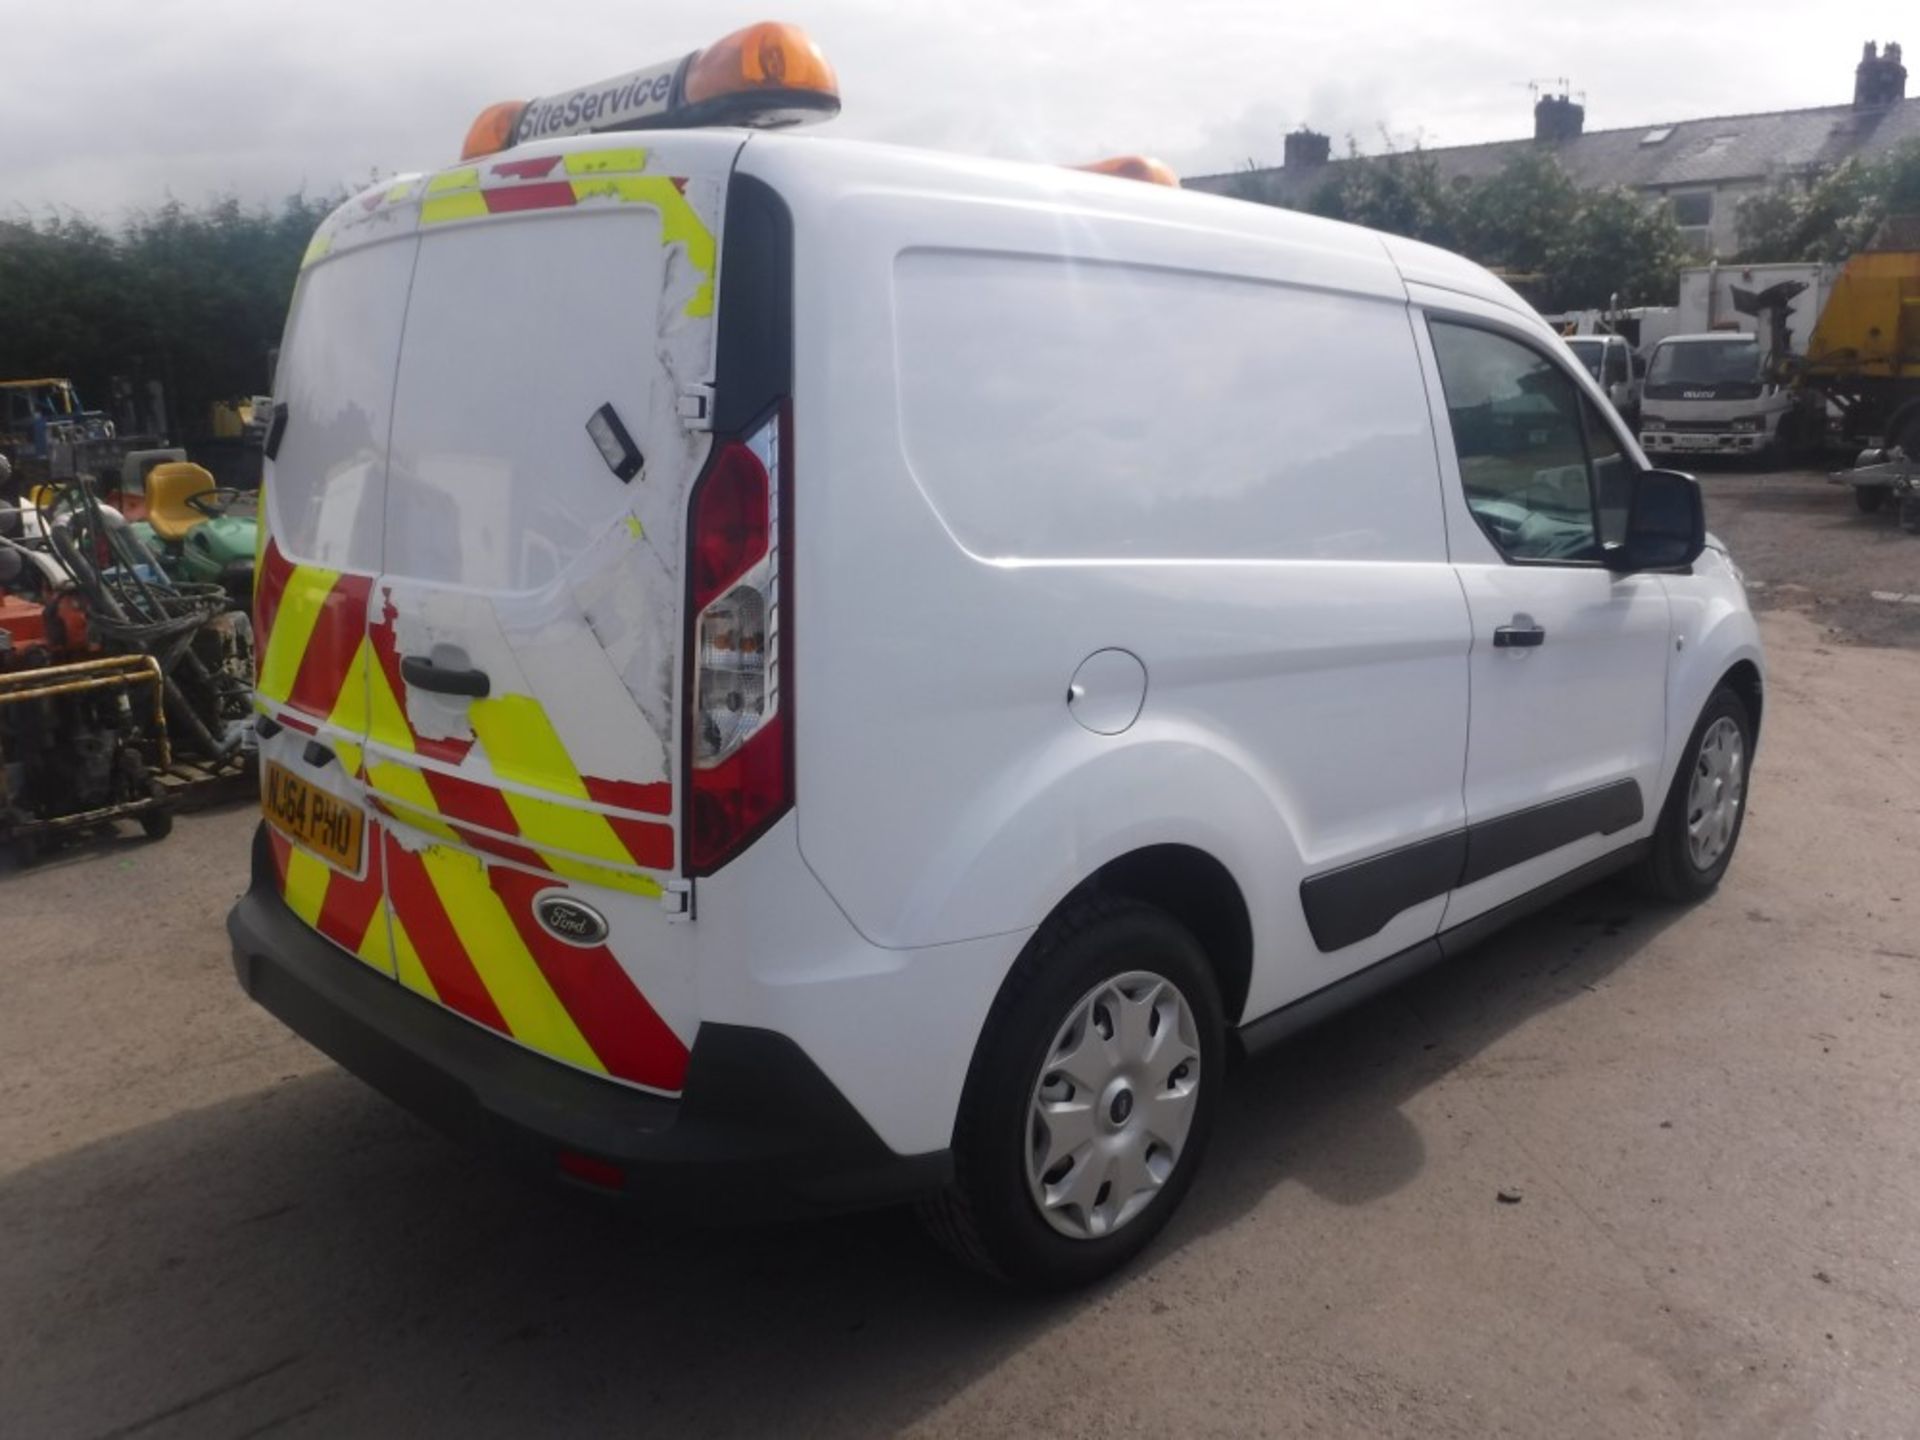 64 reg FORD TRANSIT CONNECT 200 TREND, 1ST REG 09/14, 34440M NOT WARRANTED, V5 HERE, 1 OWNER FROM - Image 4 of 5